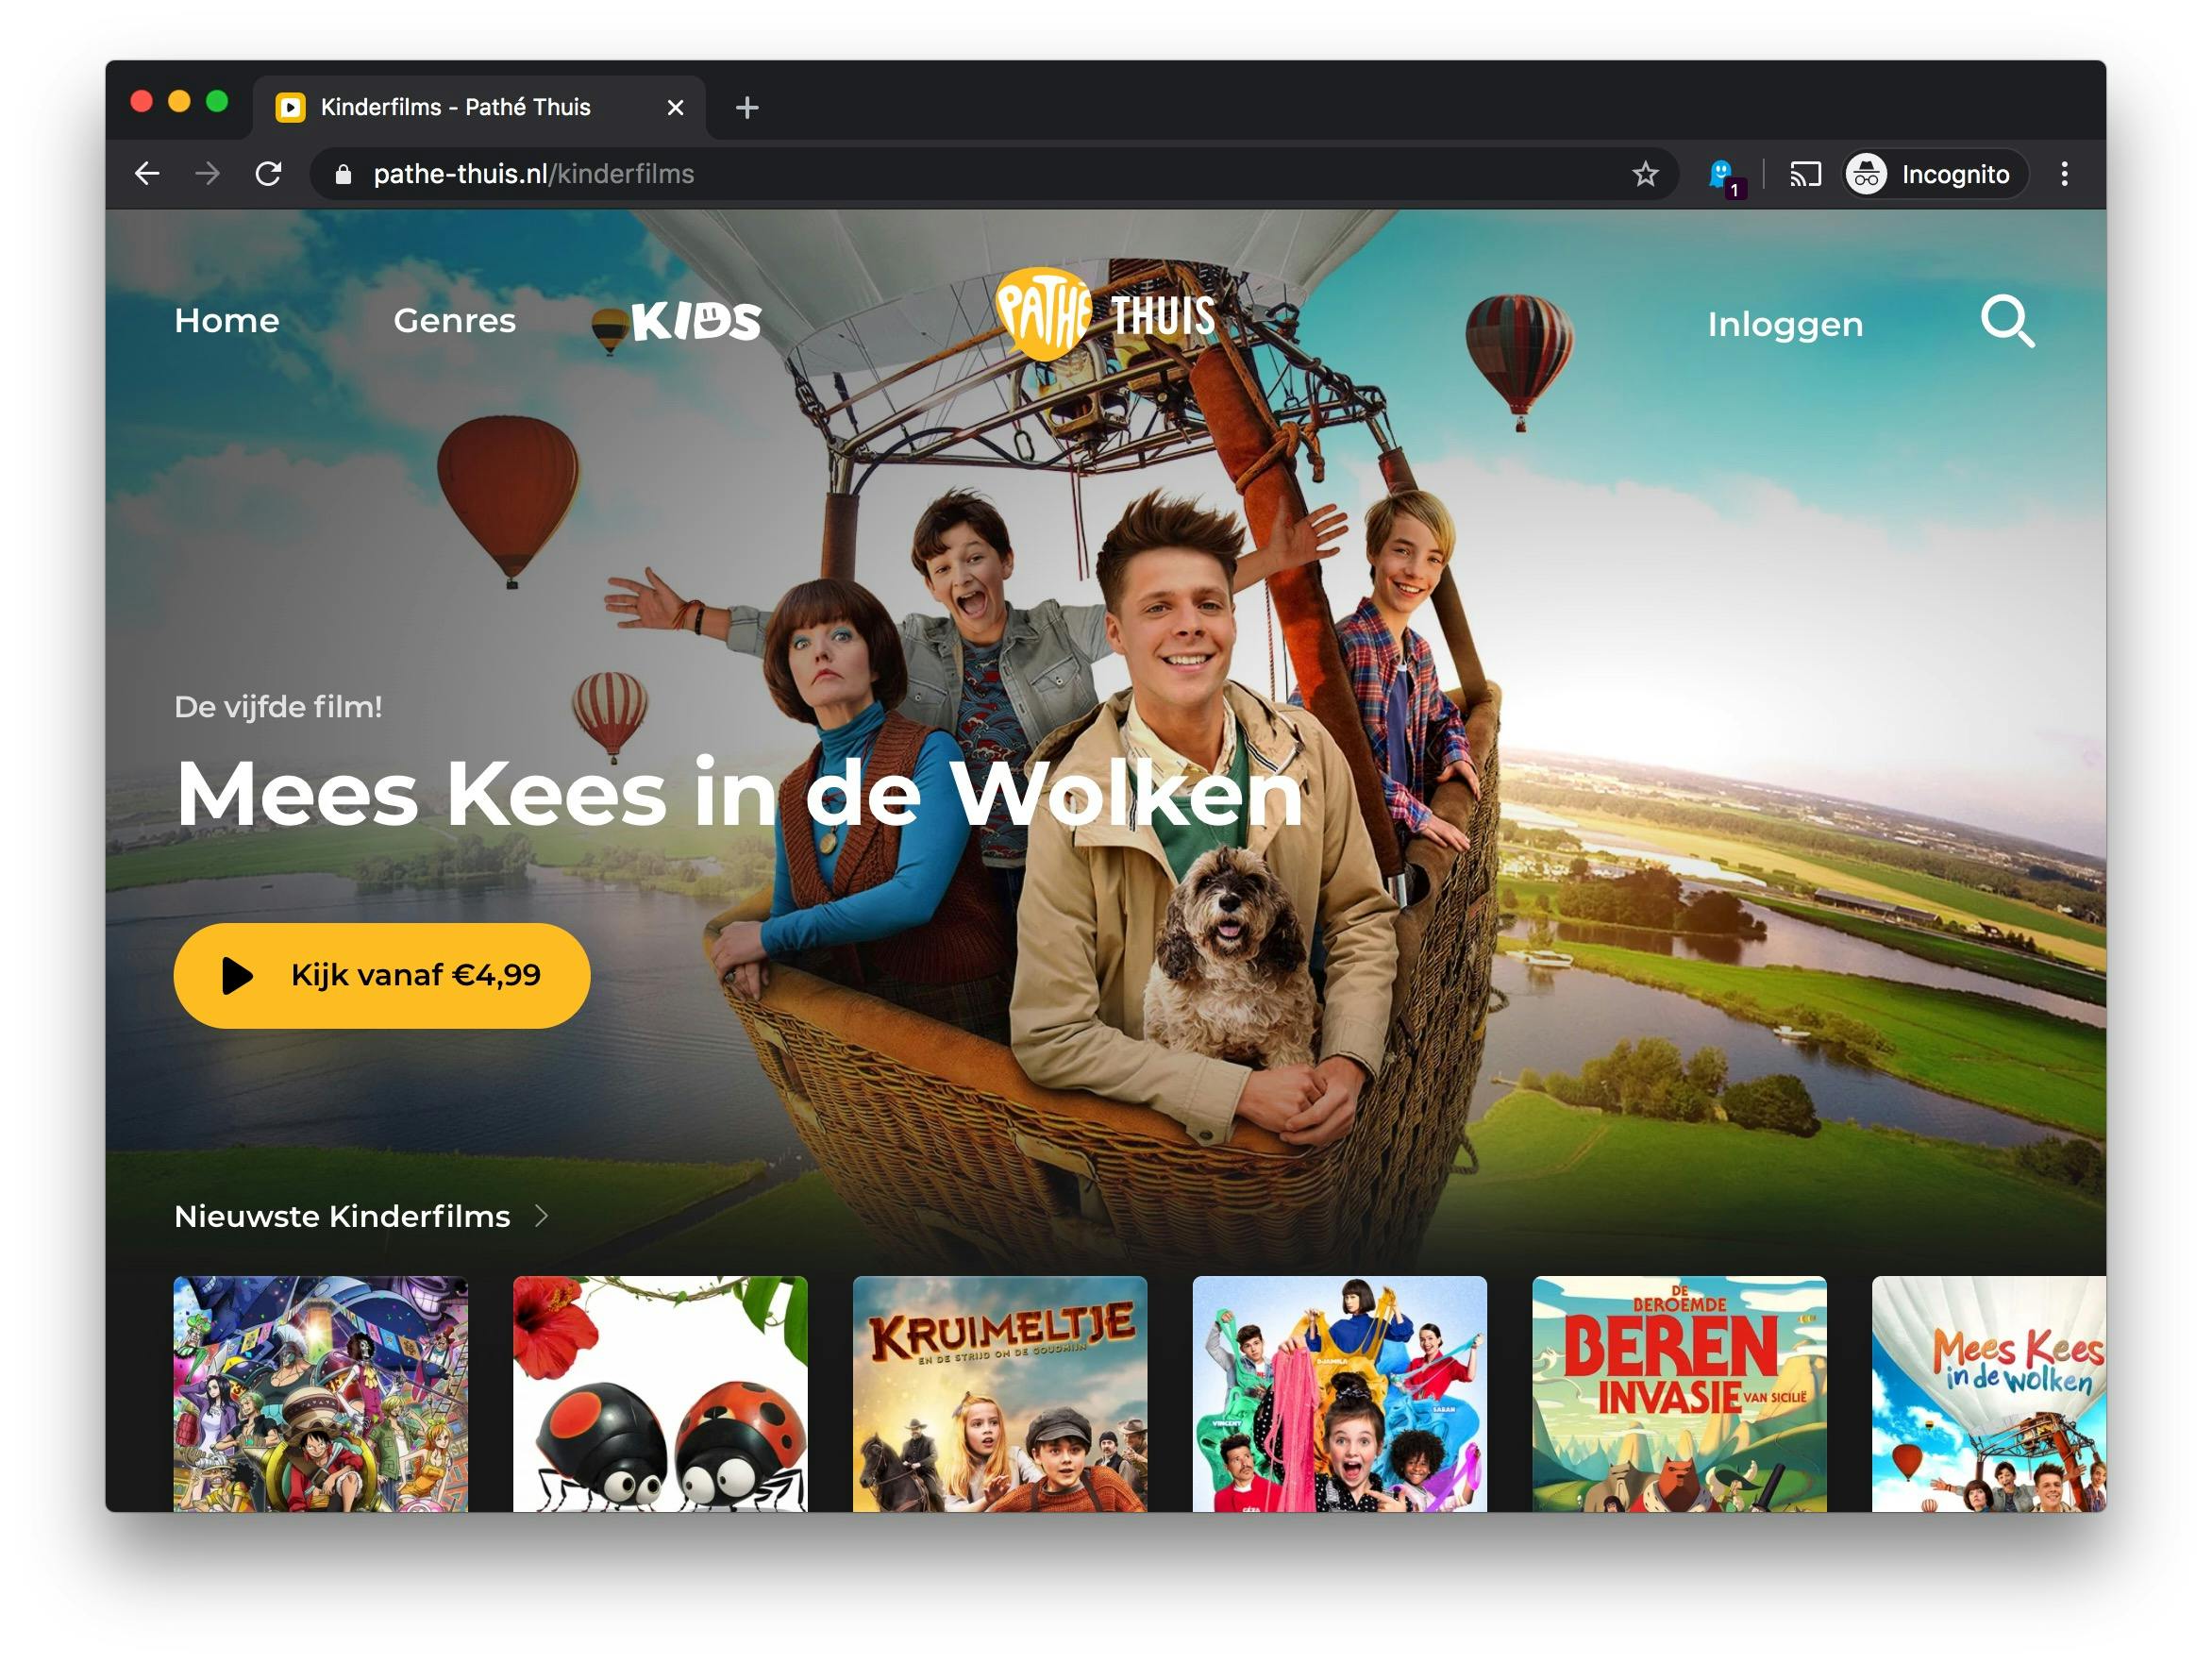 Pathé Thuis welcomes new users with Kids section